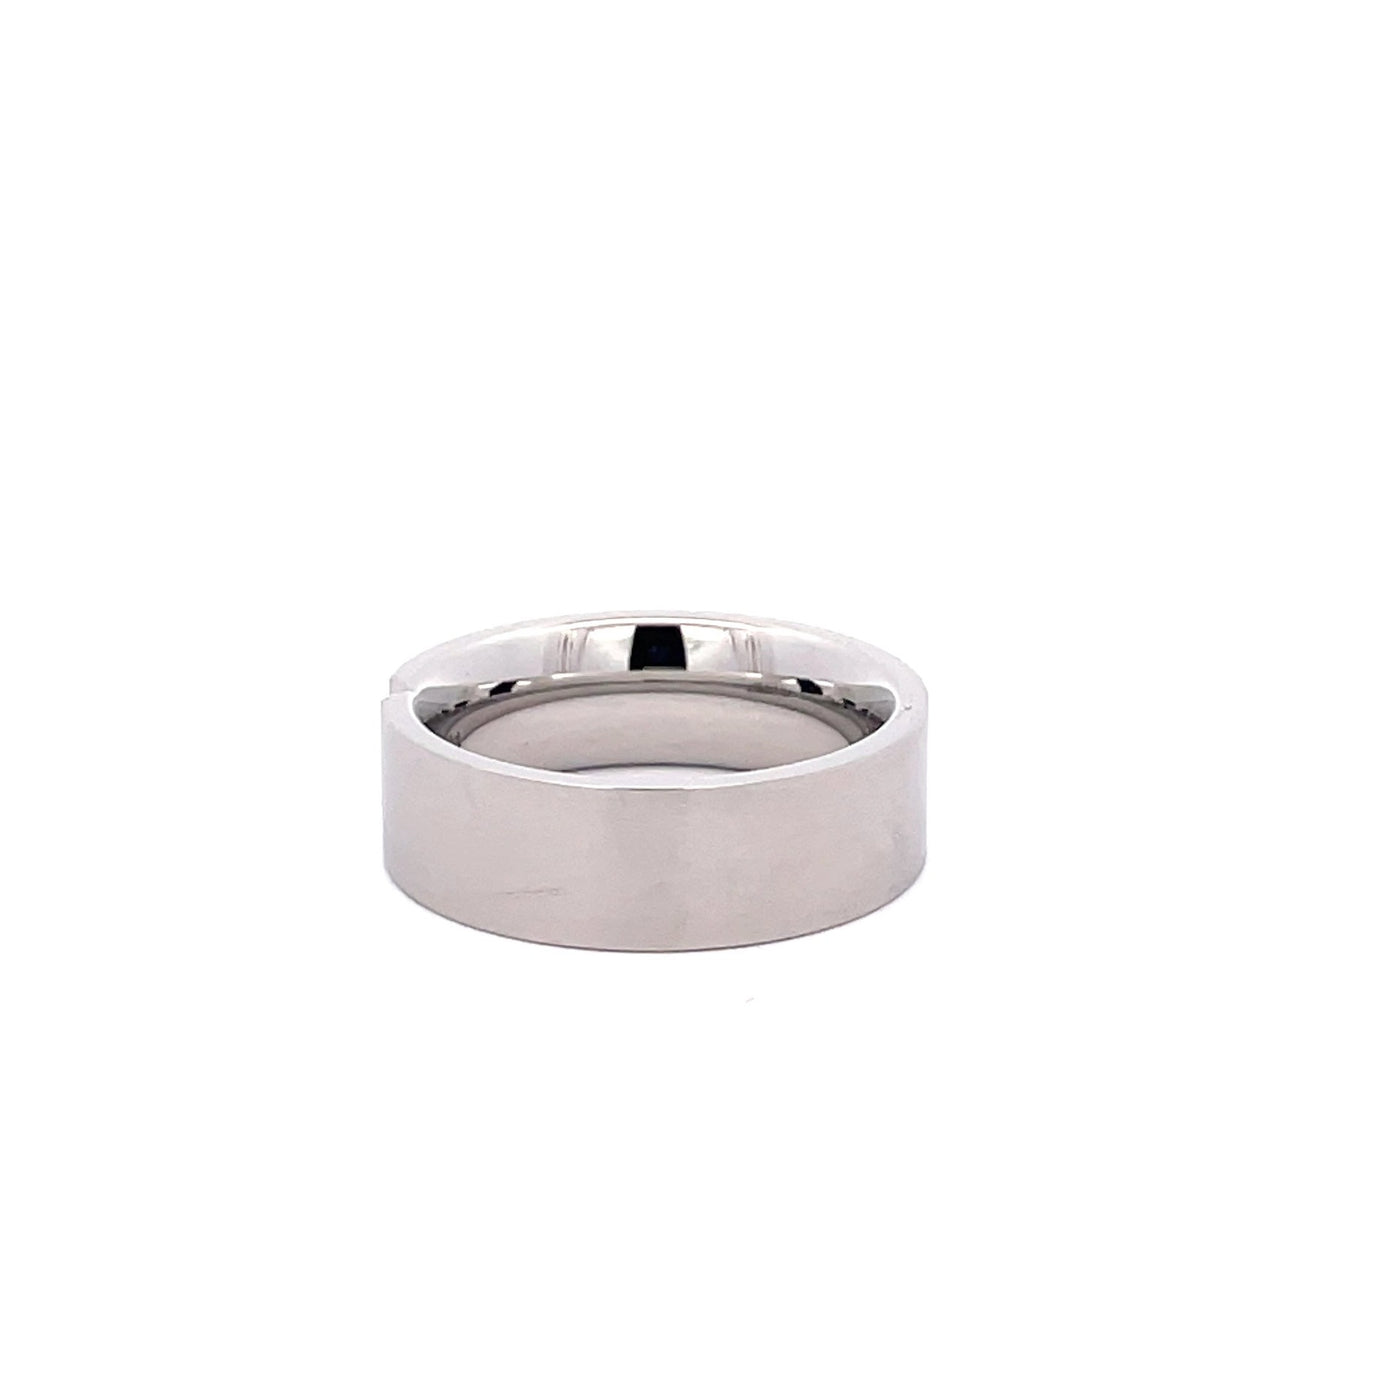 7.5mm Stainless Steel Triple Diamond Ring Size R 1/2